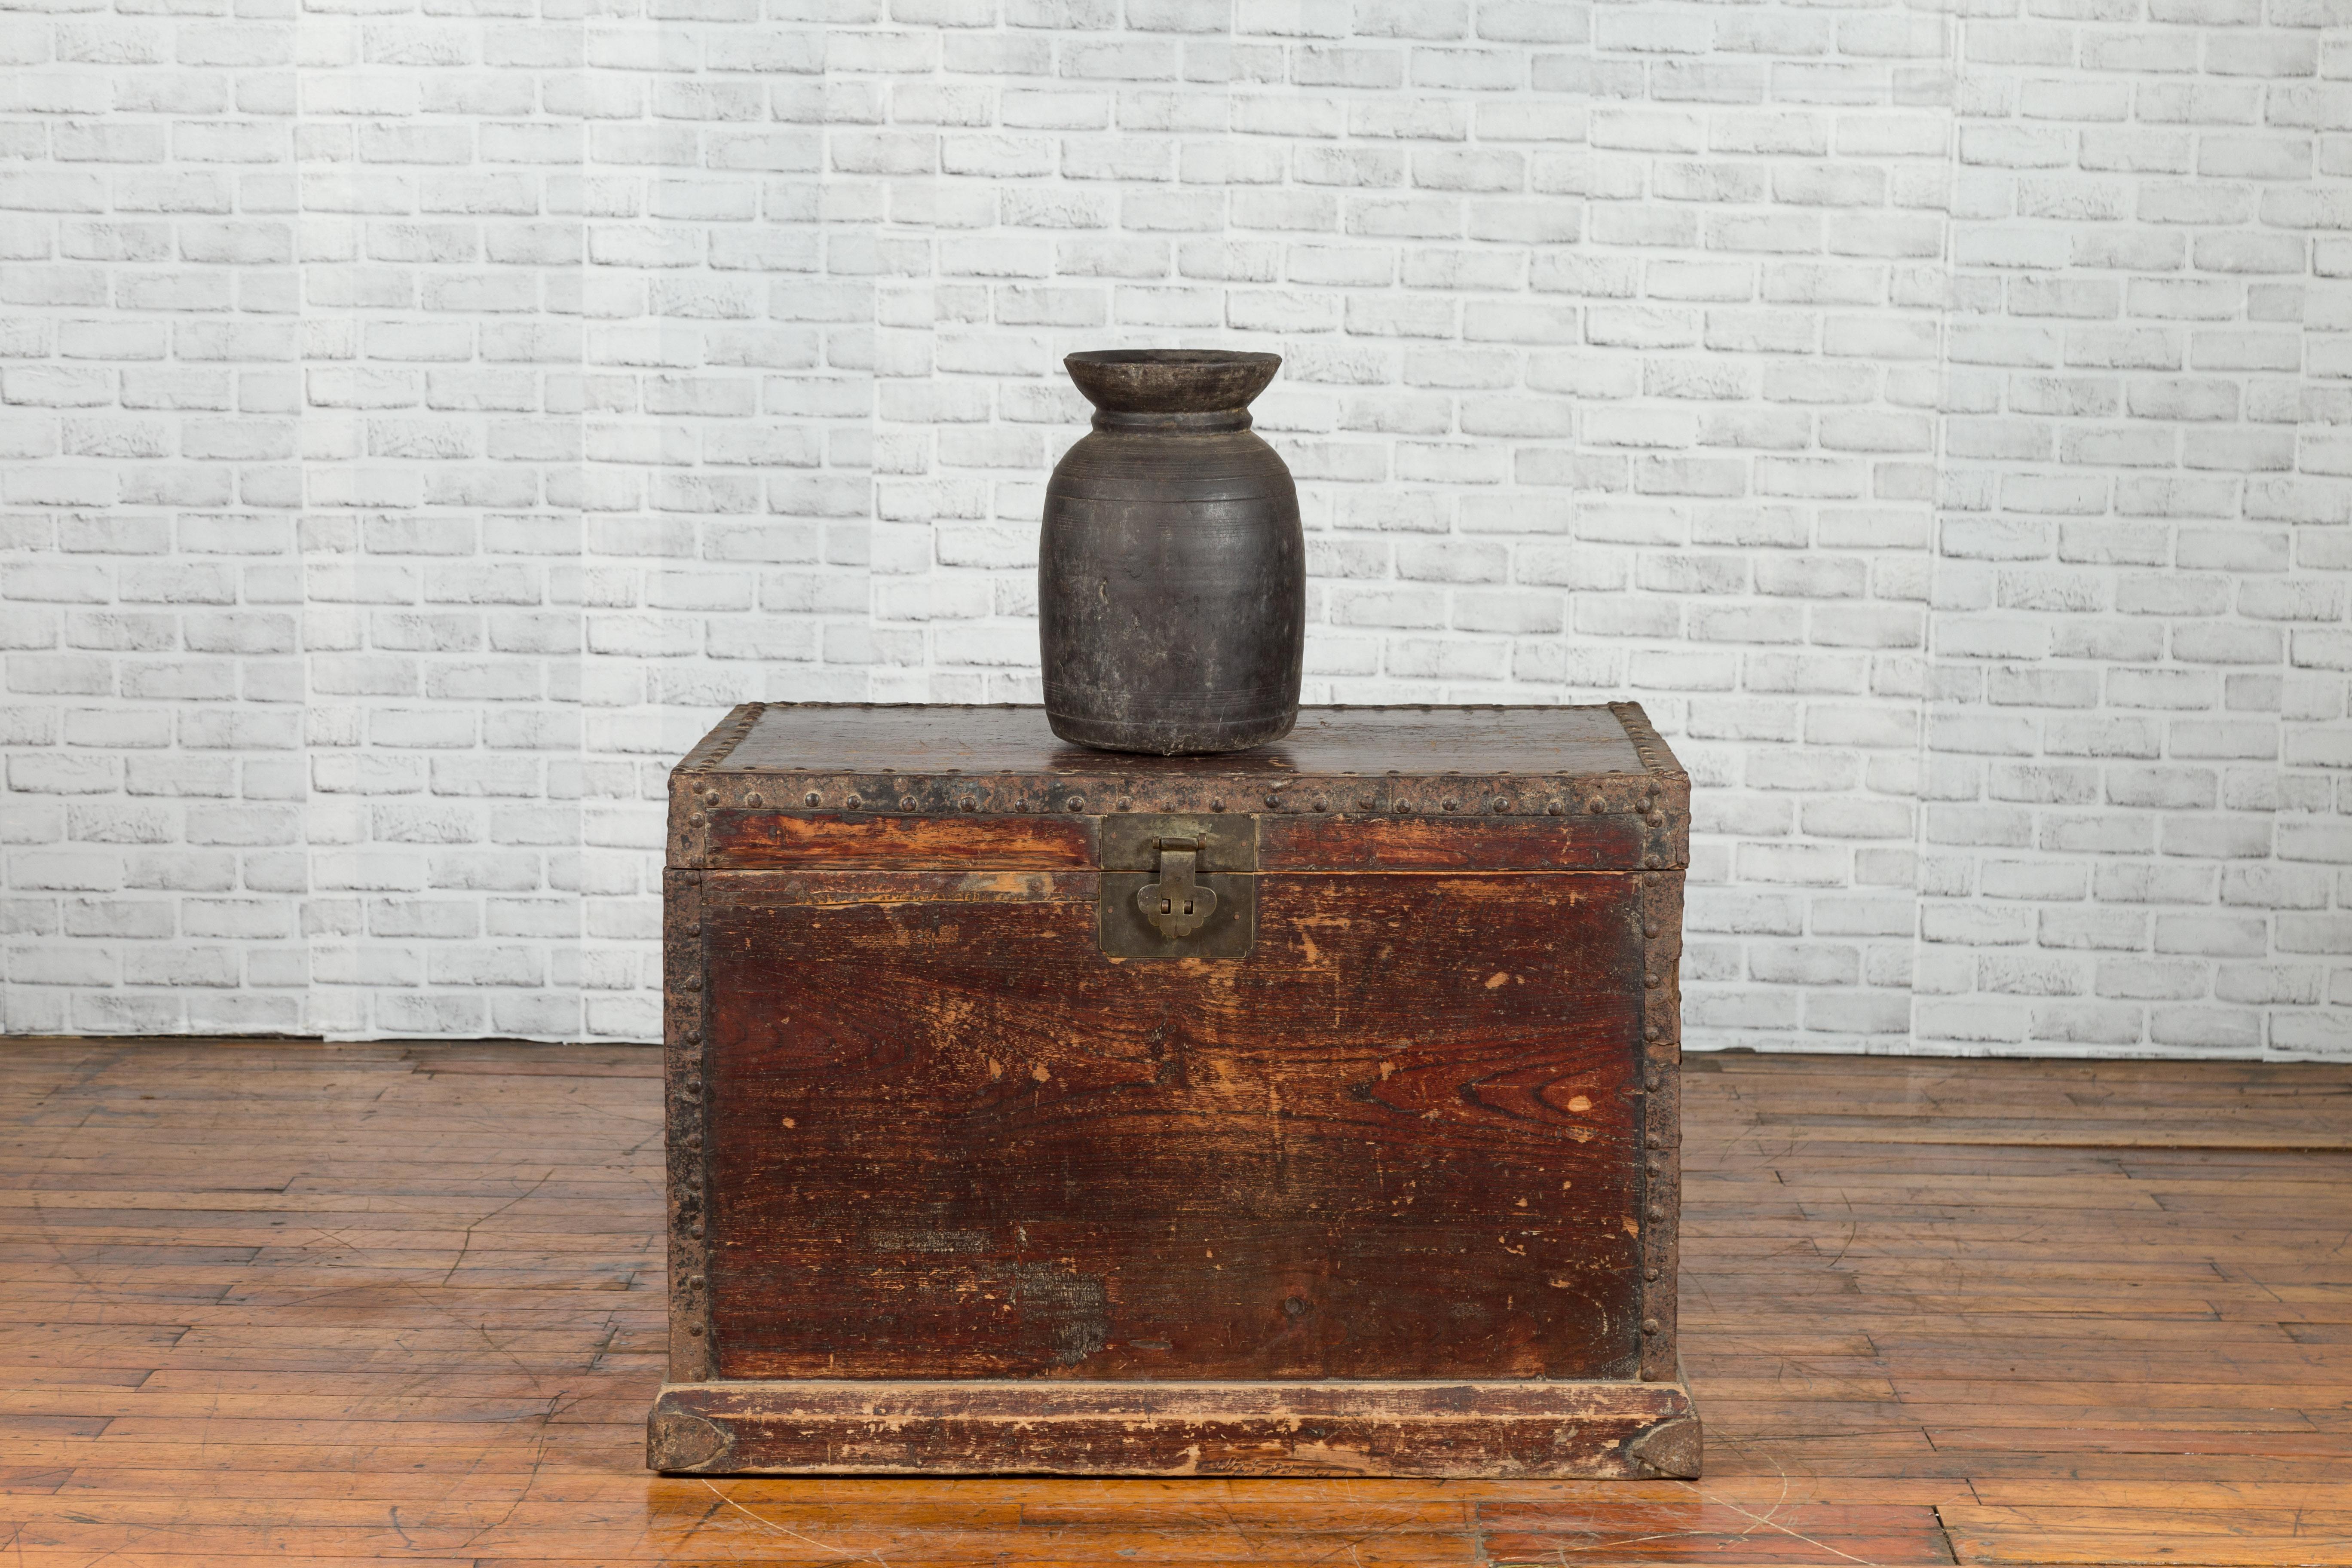 A large Chinese Qing Dynasty period distressed blanket chest from the 19th century, with iron fittings and lateral handles. Created in China during the Qing dynasty, this chest features a linear silhouette rhythmically accented with iron studs and